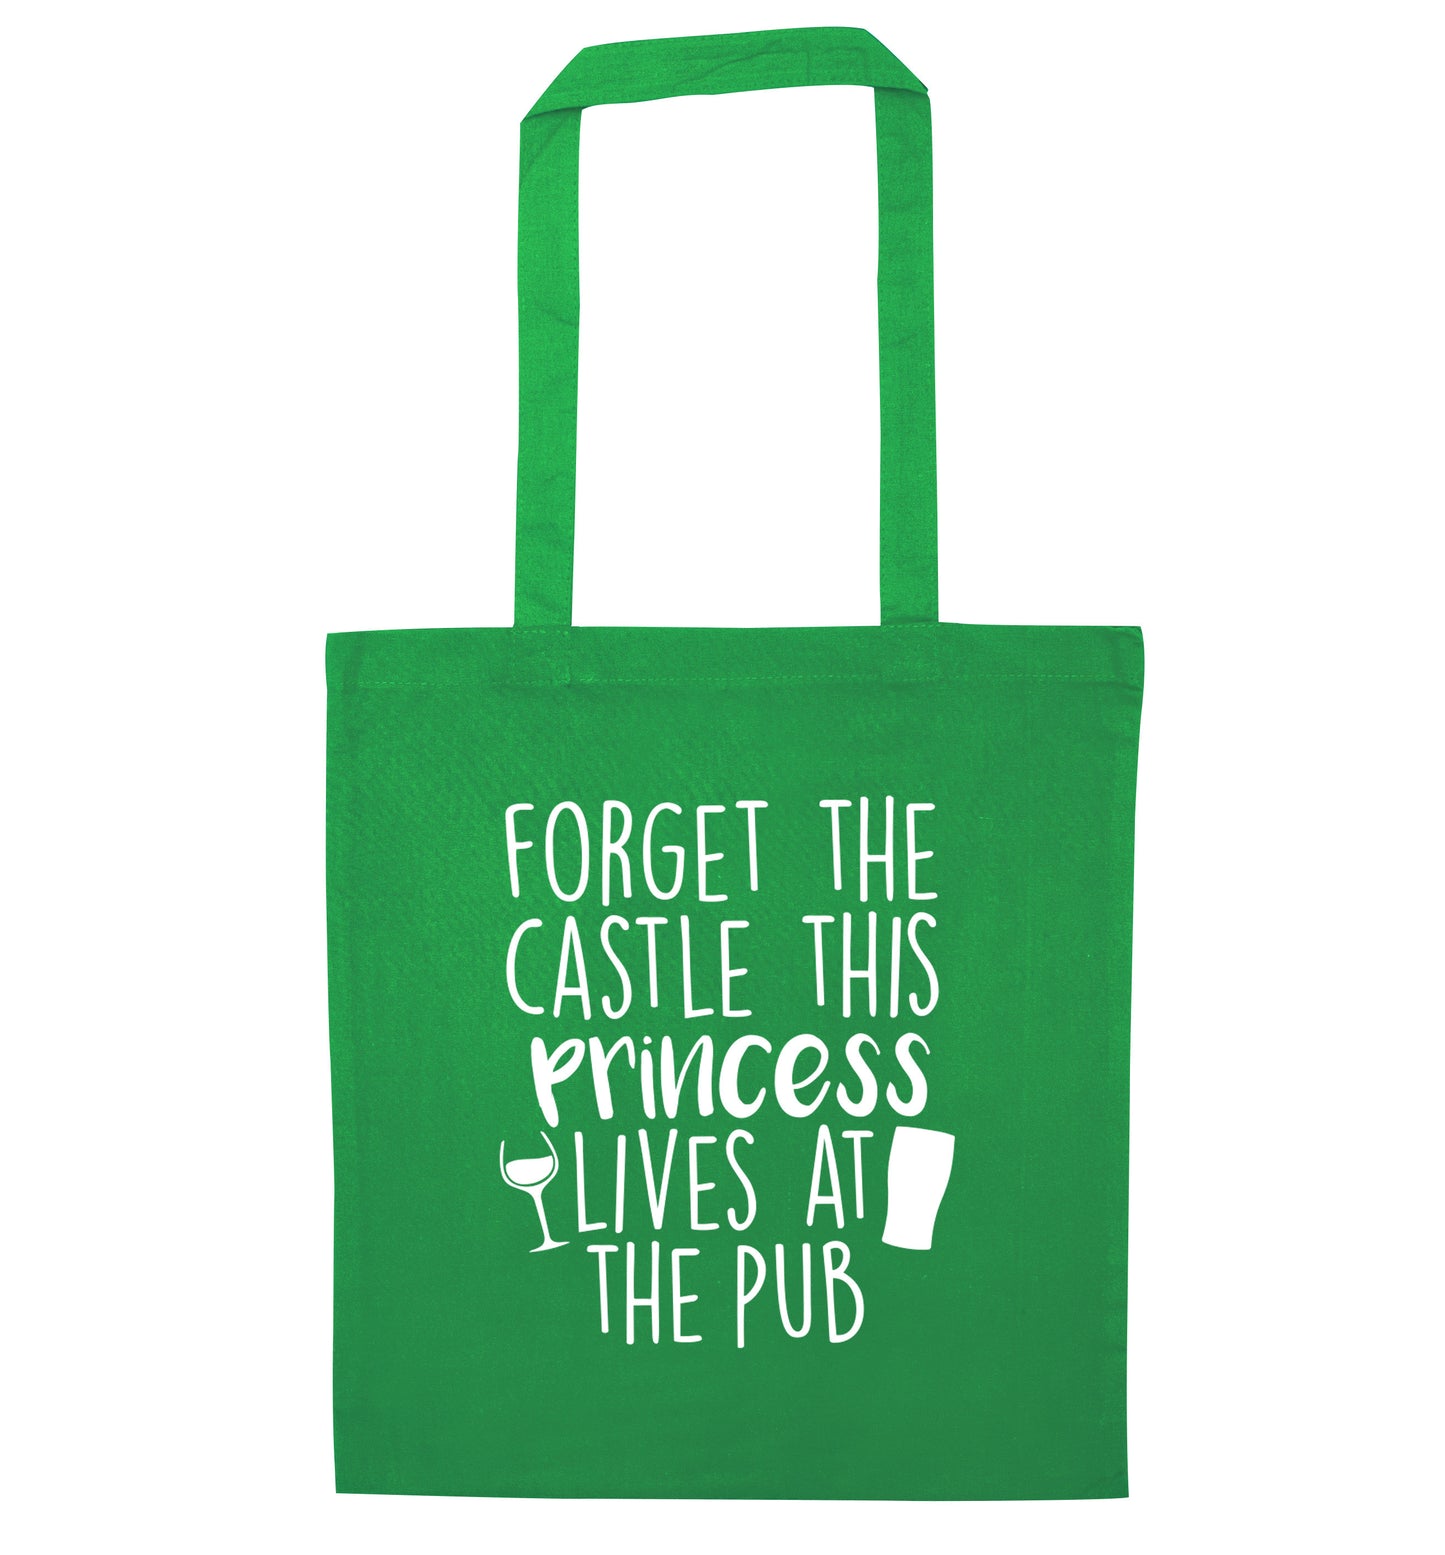 Forget the castle this princess lives at the pub green tote bag